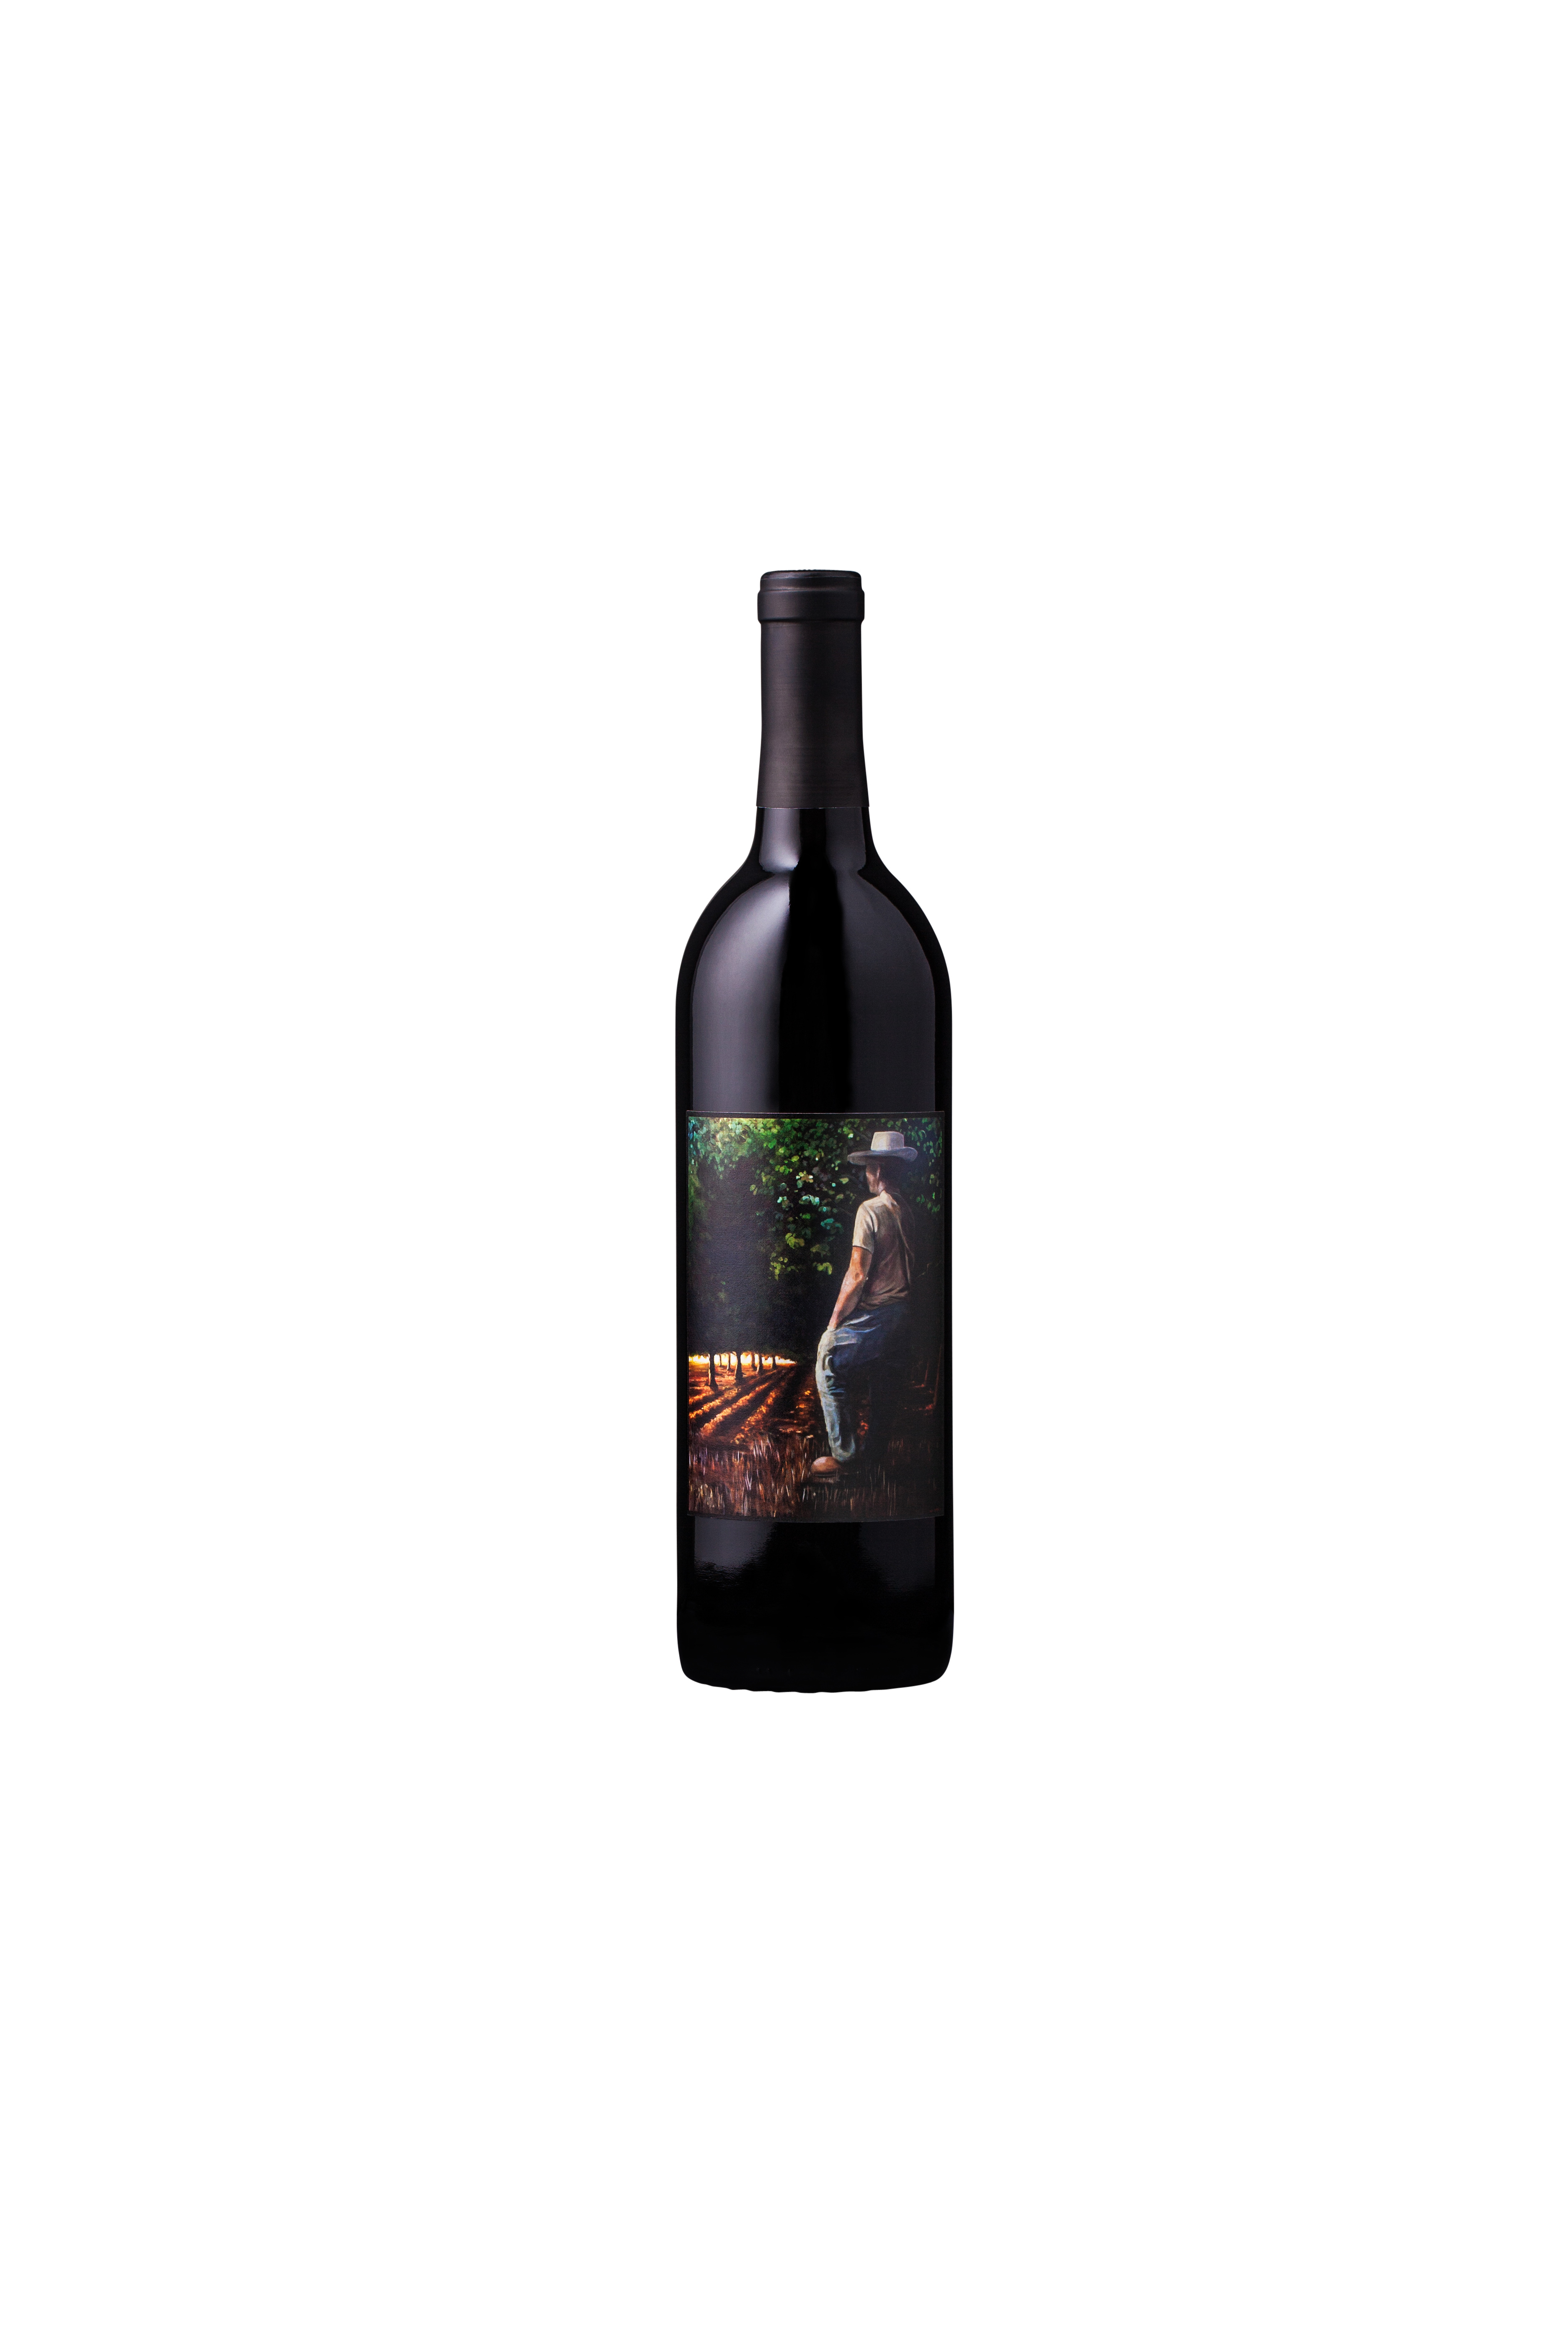 Product Image for Trahan 2012 "Grandpa's" Cabernet Sauvignon Rutherford